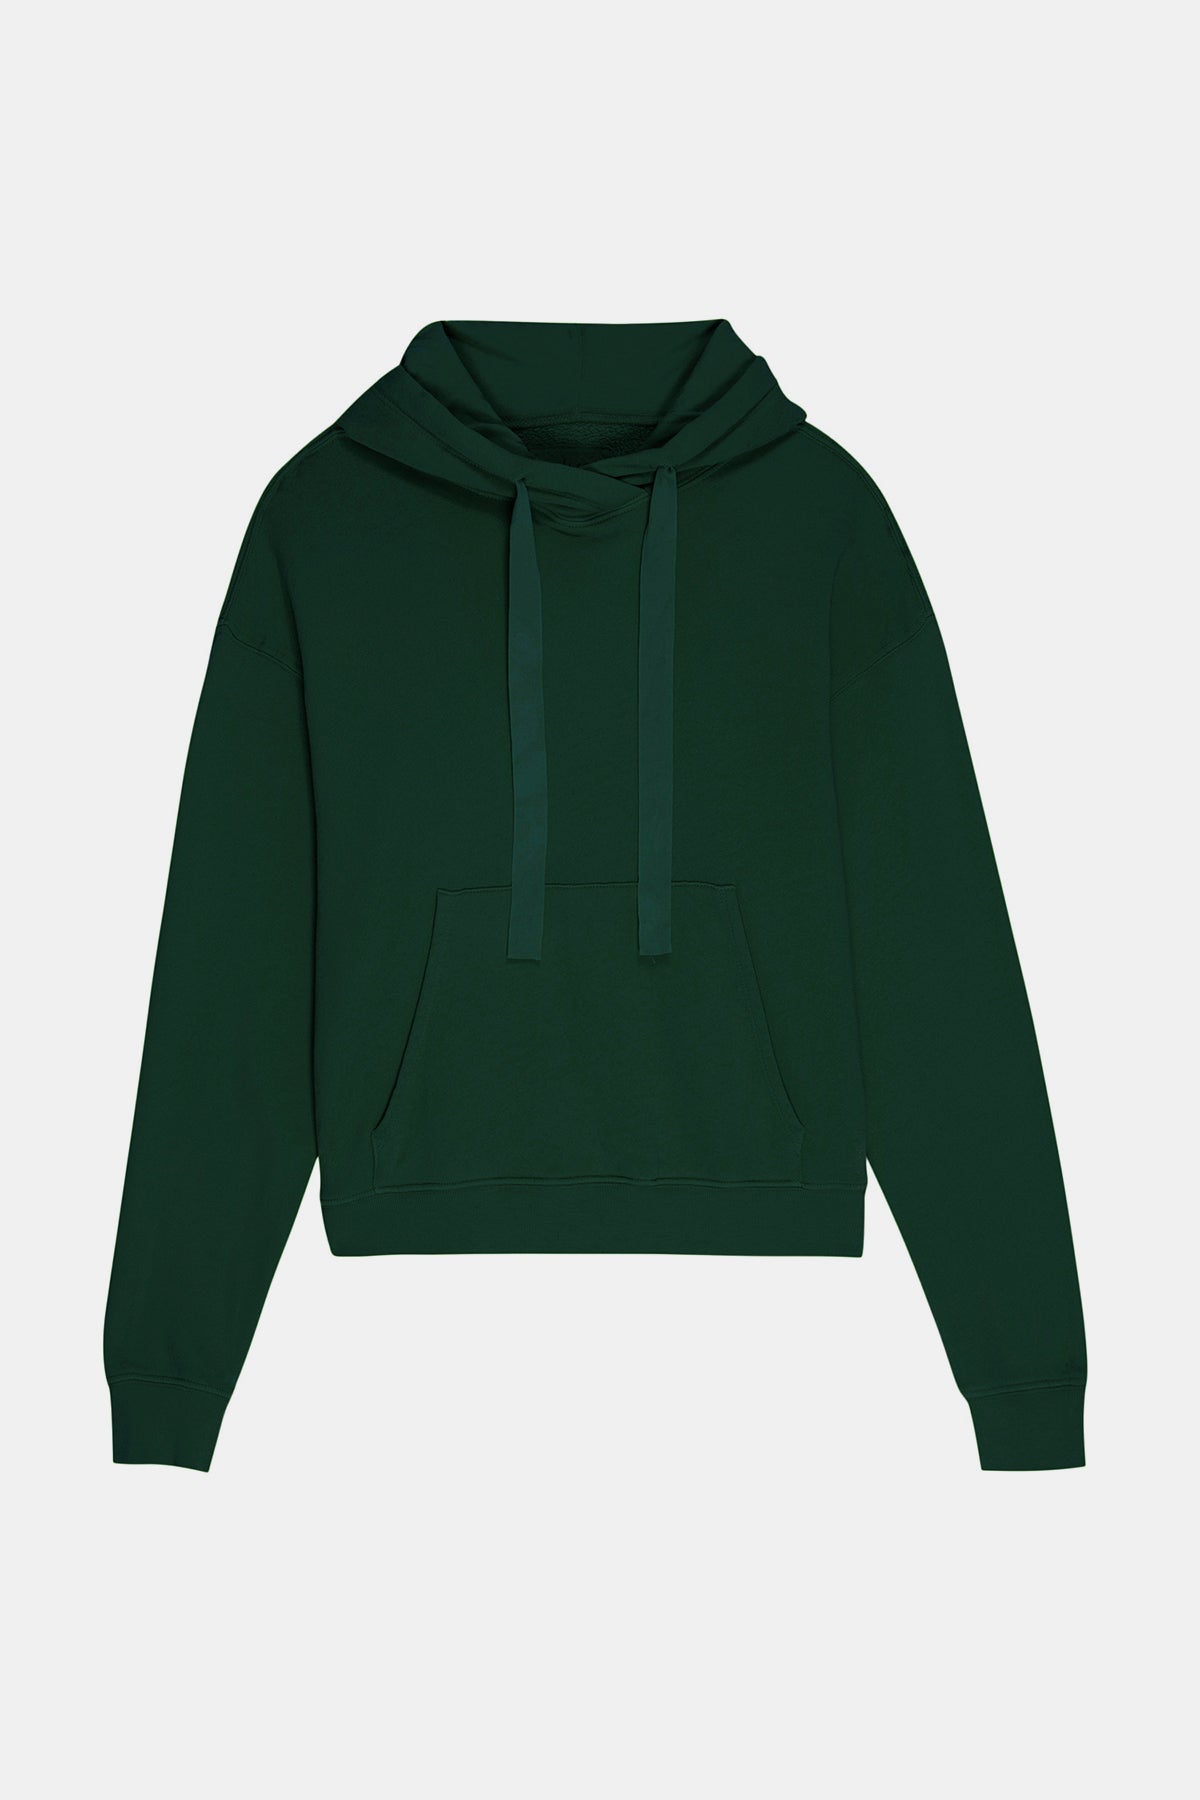   Ojai Hoodie in forest green flat 